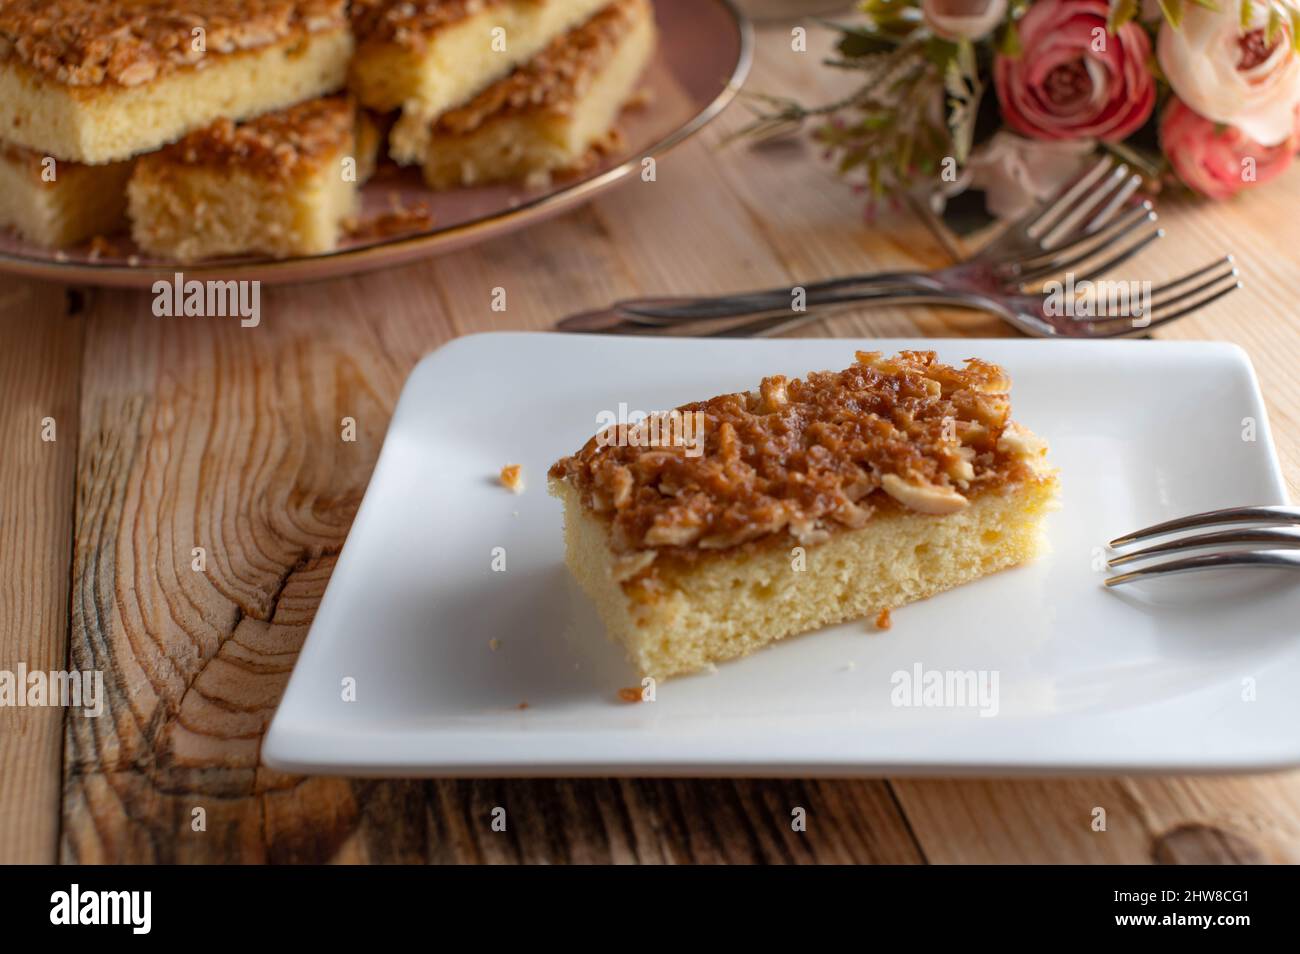 Butter cake with caramelized almonds Stock Photo